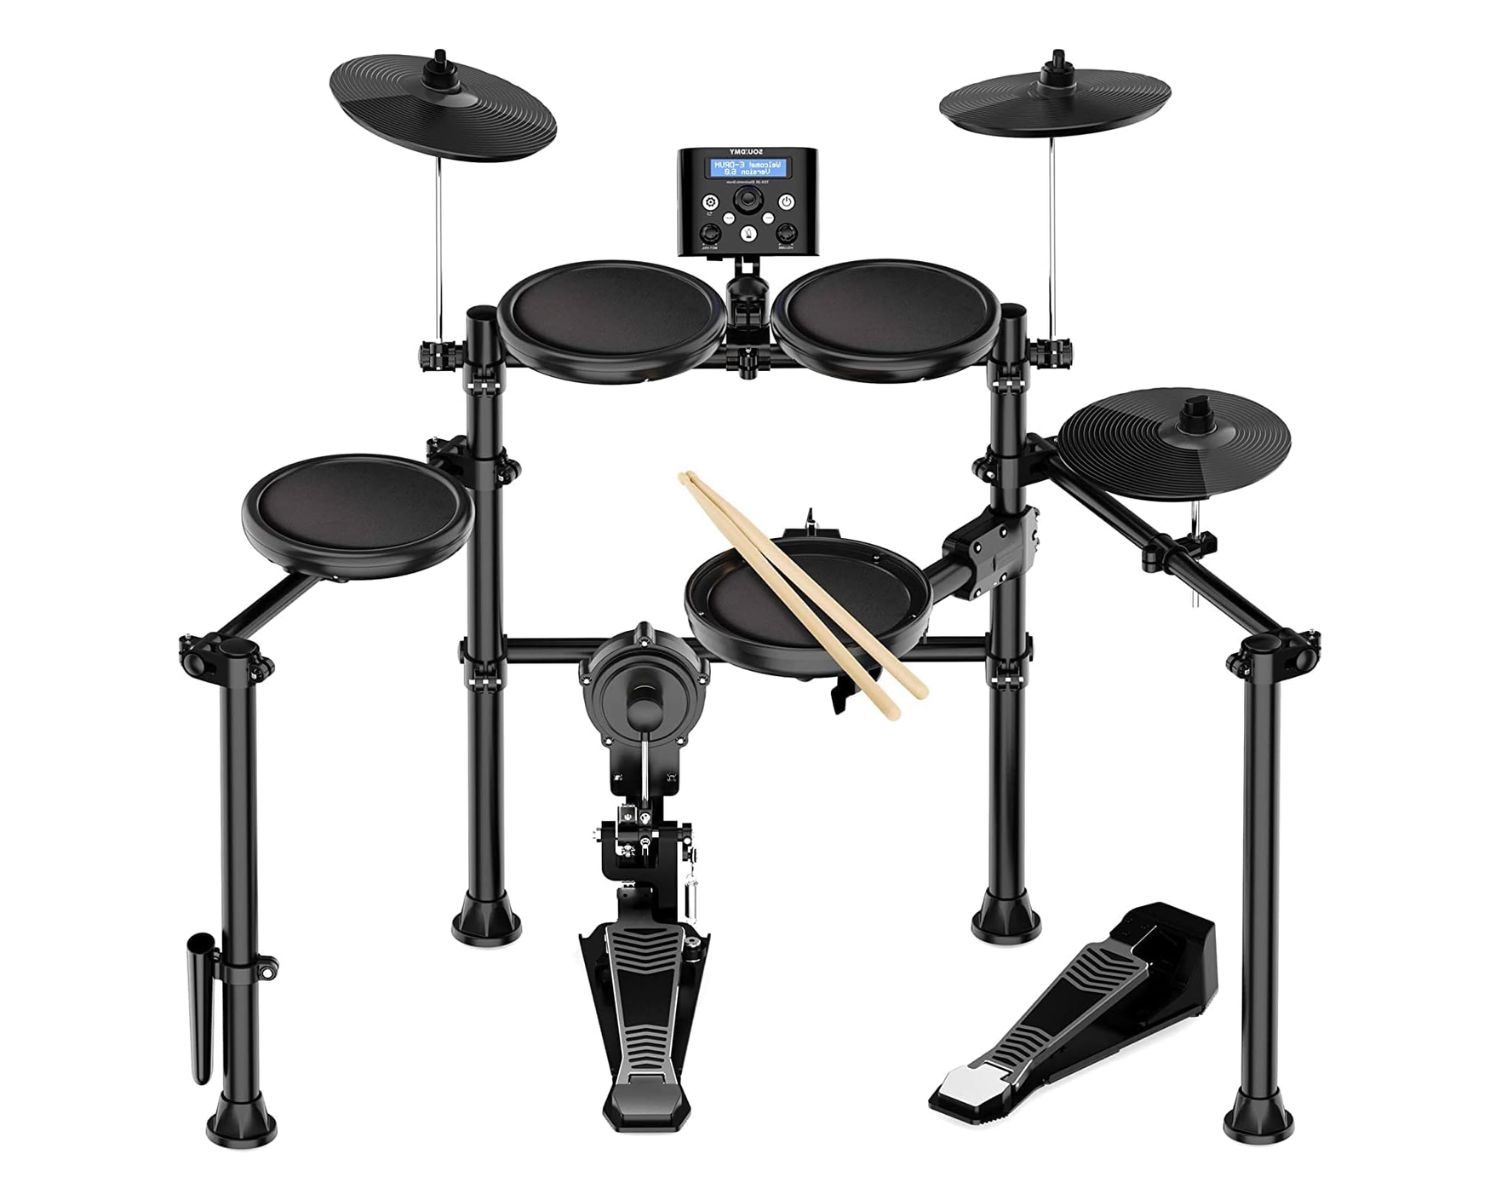 Top-rated Electronic Drum Set for Him: A Comprehensive Review